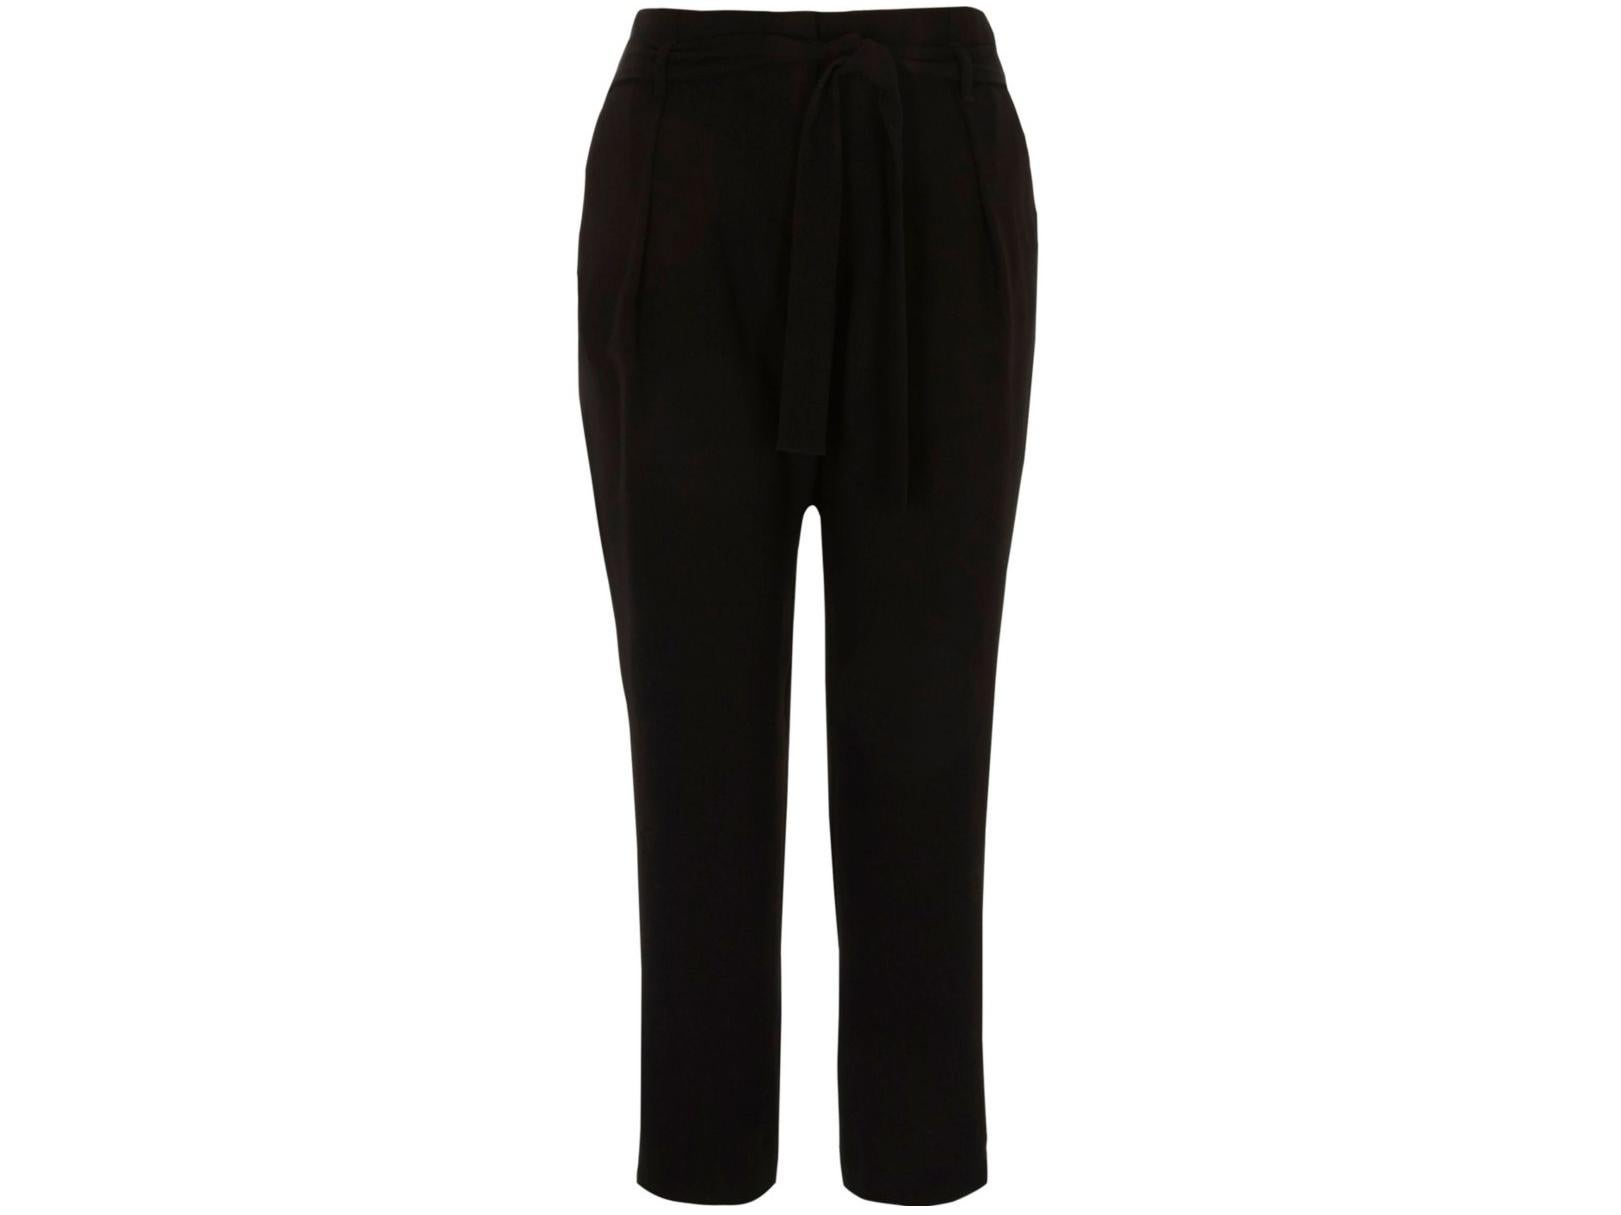 Black Tie Waist Tapered Trousers, £36, River Island